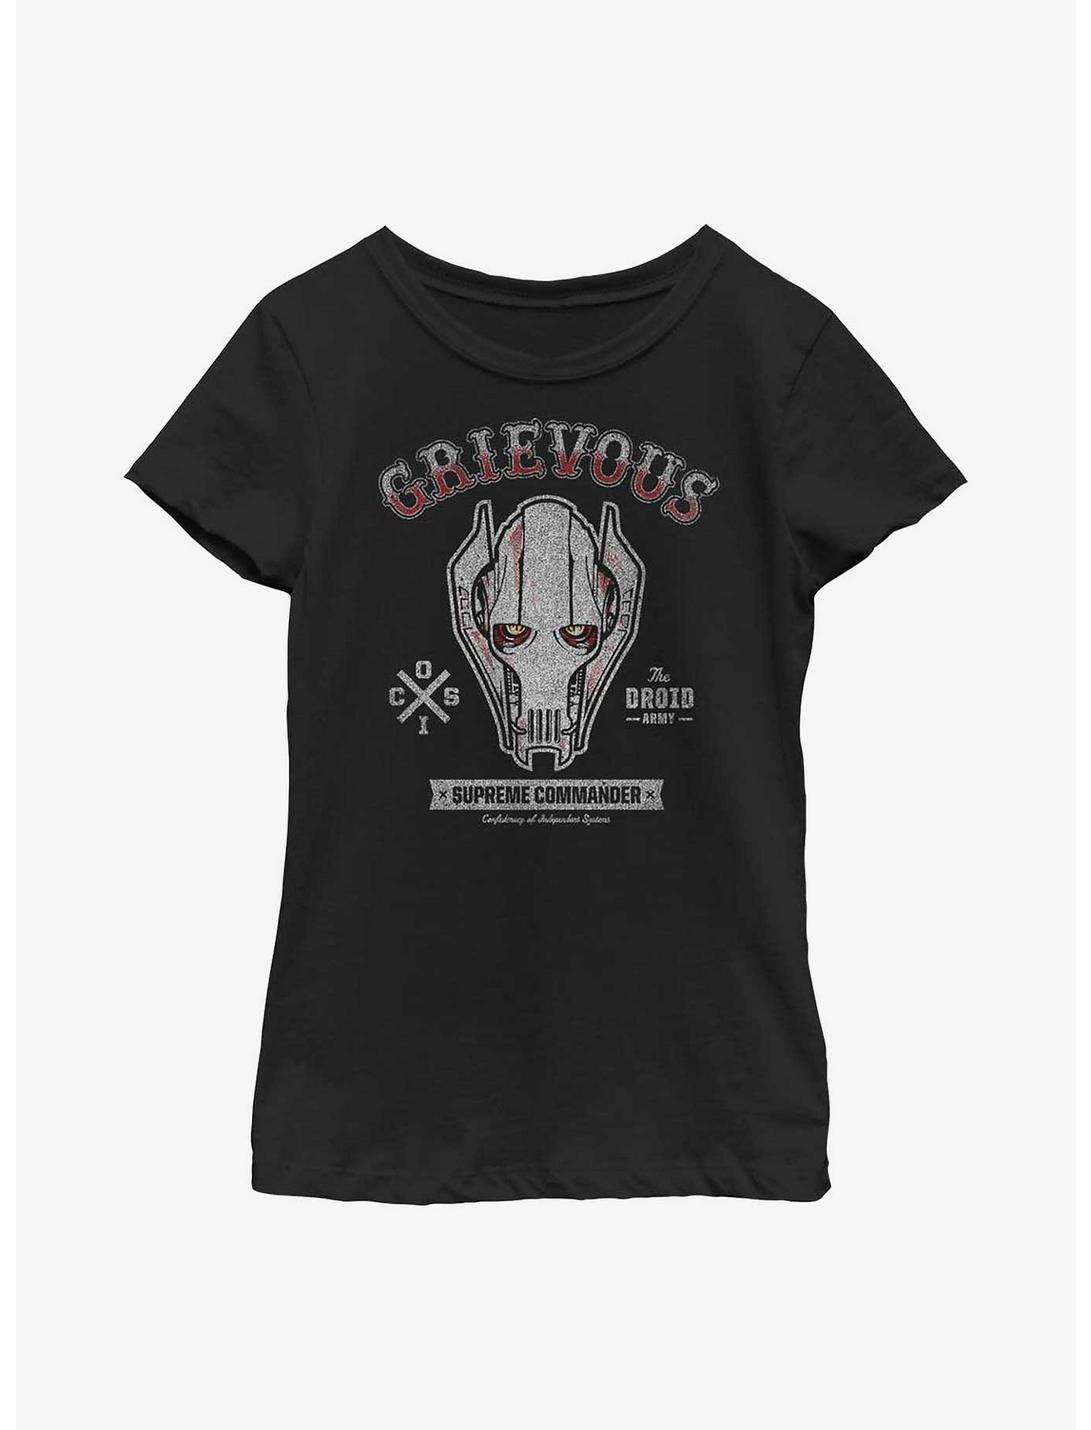 Star Wars Confederacy General Grievous Youth Girls T-Shirt, BLACK, hi-res